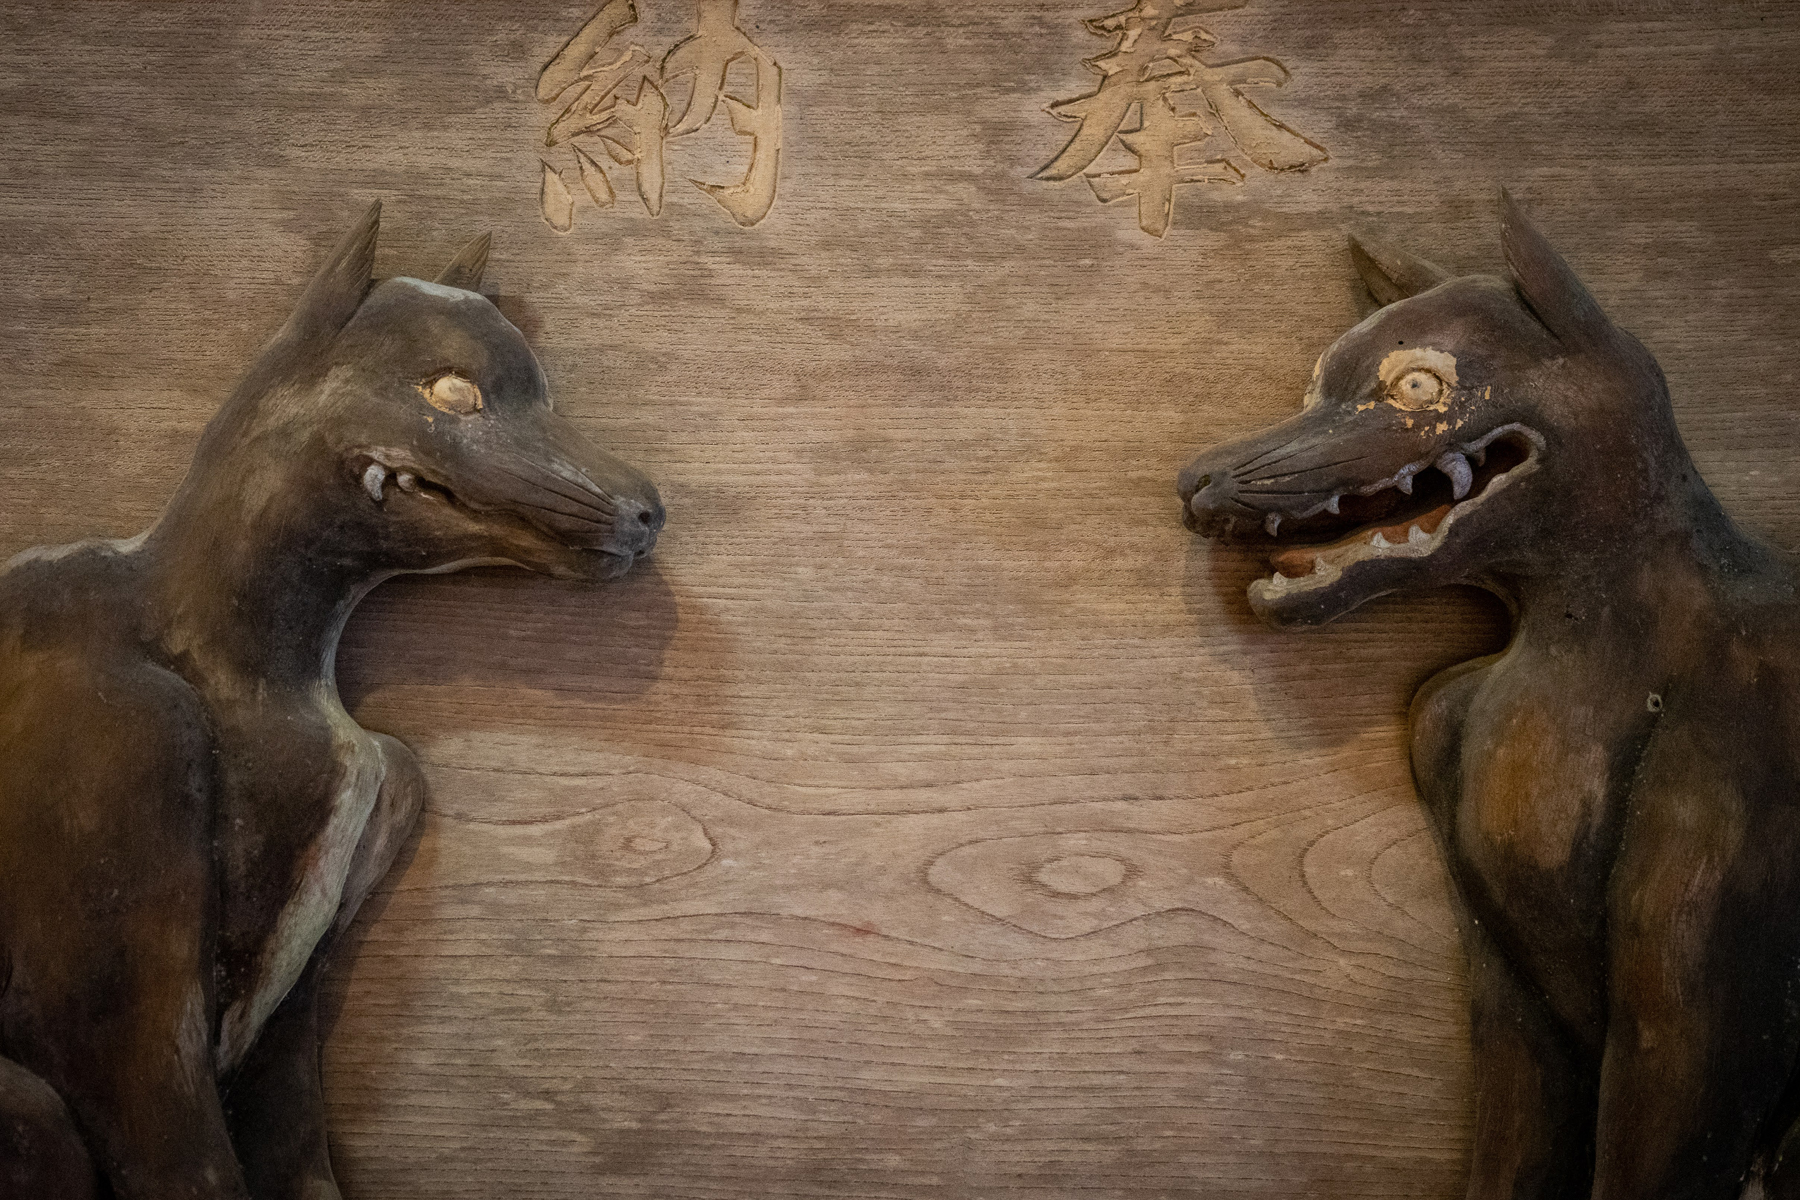 A pair of wolves carved from wood exhibited at Mitsumine Shrine's museum in Chichibu, Saitama Prefecture | OSCAR BOYD